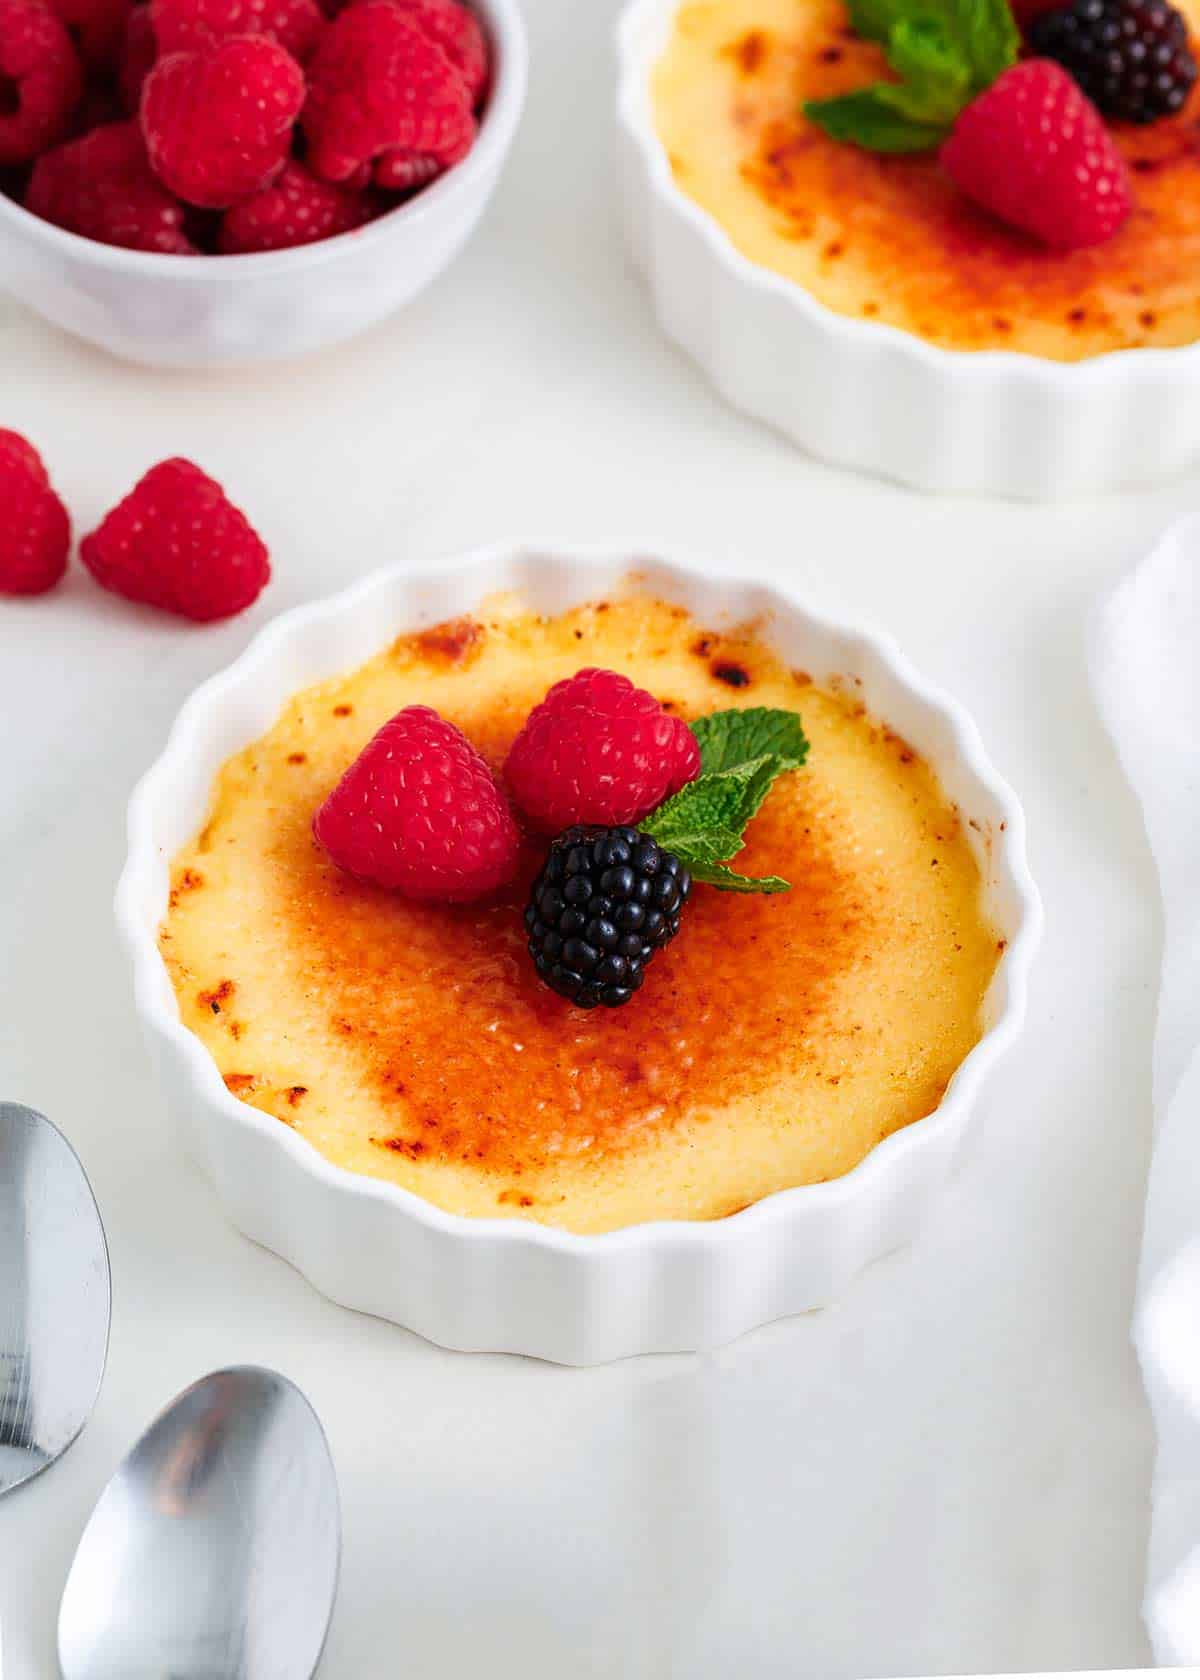 Creme brulee in a white baking dish.